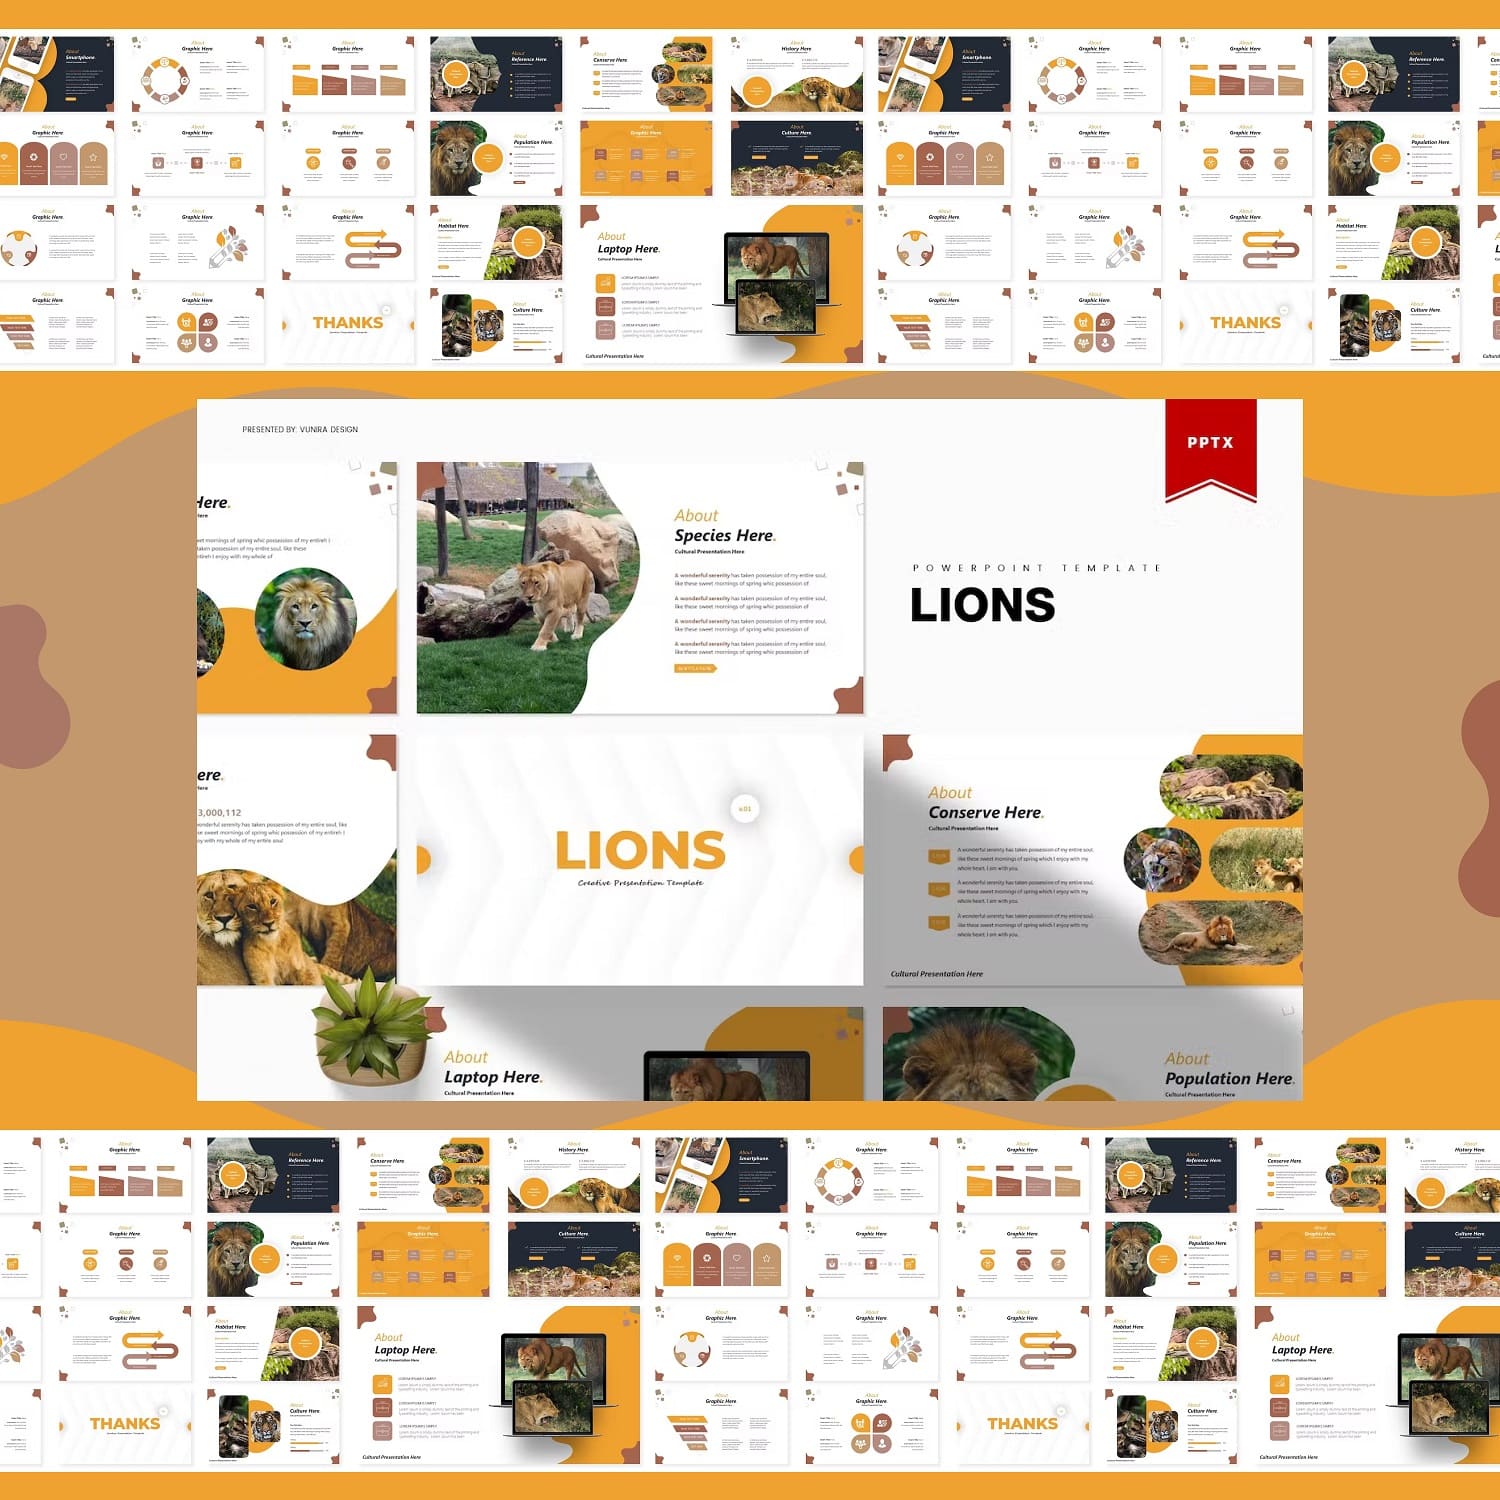 Species of Lions powerpoint template.